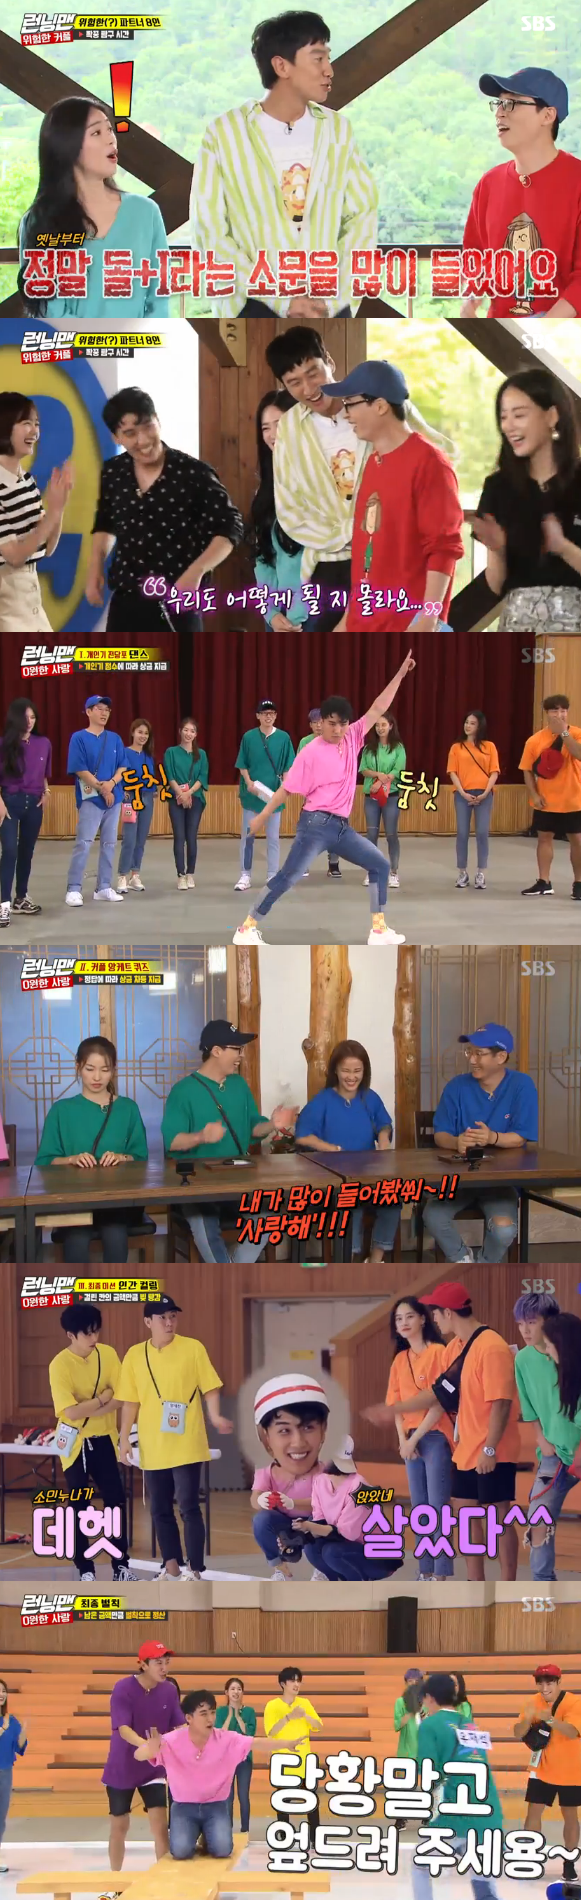 The Running Man victory played a big role.In the SBS entertainment program Running Man broadcasted on the afternoon of the 9th, Big Bangs victory, Icons Bobby and Mamdouh Elssbiay, Actor Lee Jia, Lee Elijah, Lee Joo-yeon, singer Sunmi and gag woman Kim Ji-min participated in the couple race.Lee Elijah first laughed at the question, What kind of person is Lee Kwang-soo known in his agency? And then said, I do not know.Lee Kwang-soo, who said, Do something to build up, was asked the same question and said, Lee Elijah was rumored to be a stone child before he first met at Running Man.Lee Jia told the story of her past career as a member of the group Tite.In Japan, Tite meant heart in Japanese, he said.Members could not say, It gets mature.Haha said, Gary, a former member of Running Man, was a Japanese word for diarrhea.Lee Joo-yeon performed the choreography of After Schools famous song Diva.He said firmly, Dont look, when Yoo Jae-Suk said, Its a stage you dont know when youll see it again.So the members said, We should see it in Totoga. Yoo Jae-Suk, who is from Infinite Challenge, replied, I do not know what will happen to Totoga.This race was unfolded as a debt-clearing race; members had to team up as couples to settle the debts given.While several personal periods such as animal imitation and vocal cords are unfolding, Victory said, You can dance in any song.He danced to the song Shark Family, the sound of water, and the SBS news logo, and applauded Kim Jong Kook, I have a lot of weight.Mamdouh Elsbiay presented Writing Poetry as an individual.In his poem on the subject of the quantity, he bought the sympathy of the members of Running Man with the phrase If you hit the right cheek, you have to hit the left cheek and you have to hit the cheek on the TV.Lee Jia played elephant nose and spent 10 laps before putting water into the cup held by the same team member.Sunmi, who challenged him, fell down without even catching a water bar and laughed. Haha commented, Sunmi was the funniest thing he did in an entertainment program.Ji Seok-jin brought the cup he was holding and was hit by water.A game followed, matching the results of the couples survey: What was the most common lie to a lover? Kim Ji-min hit the number one I love you.Im a I love you expert, Ive heard too much, he said, giving a bitter laugh.The human curling mission was the last time.In the first round, Lee Kwang-soo unintentionally pushed Bobby into the full exemption box and gave Bobby Song Ji-hyo a full exemption with victory and Haha being pushed out early.Eventually, the final penalty was received by Haha Mamdouh Elsbiay photon.The victory that hit the plight of the penalised Mamdouh Elsbiay was upside down by Yoo Jae-Suk for a gentle slap and made a laugh to the end.On the other hand, SBS Running Man is broadcast every Sunday at 4:50 pm.Photo SBS broadcast screen capture